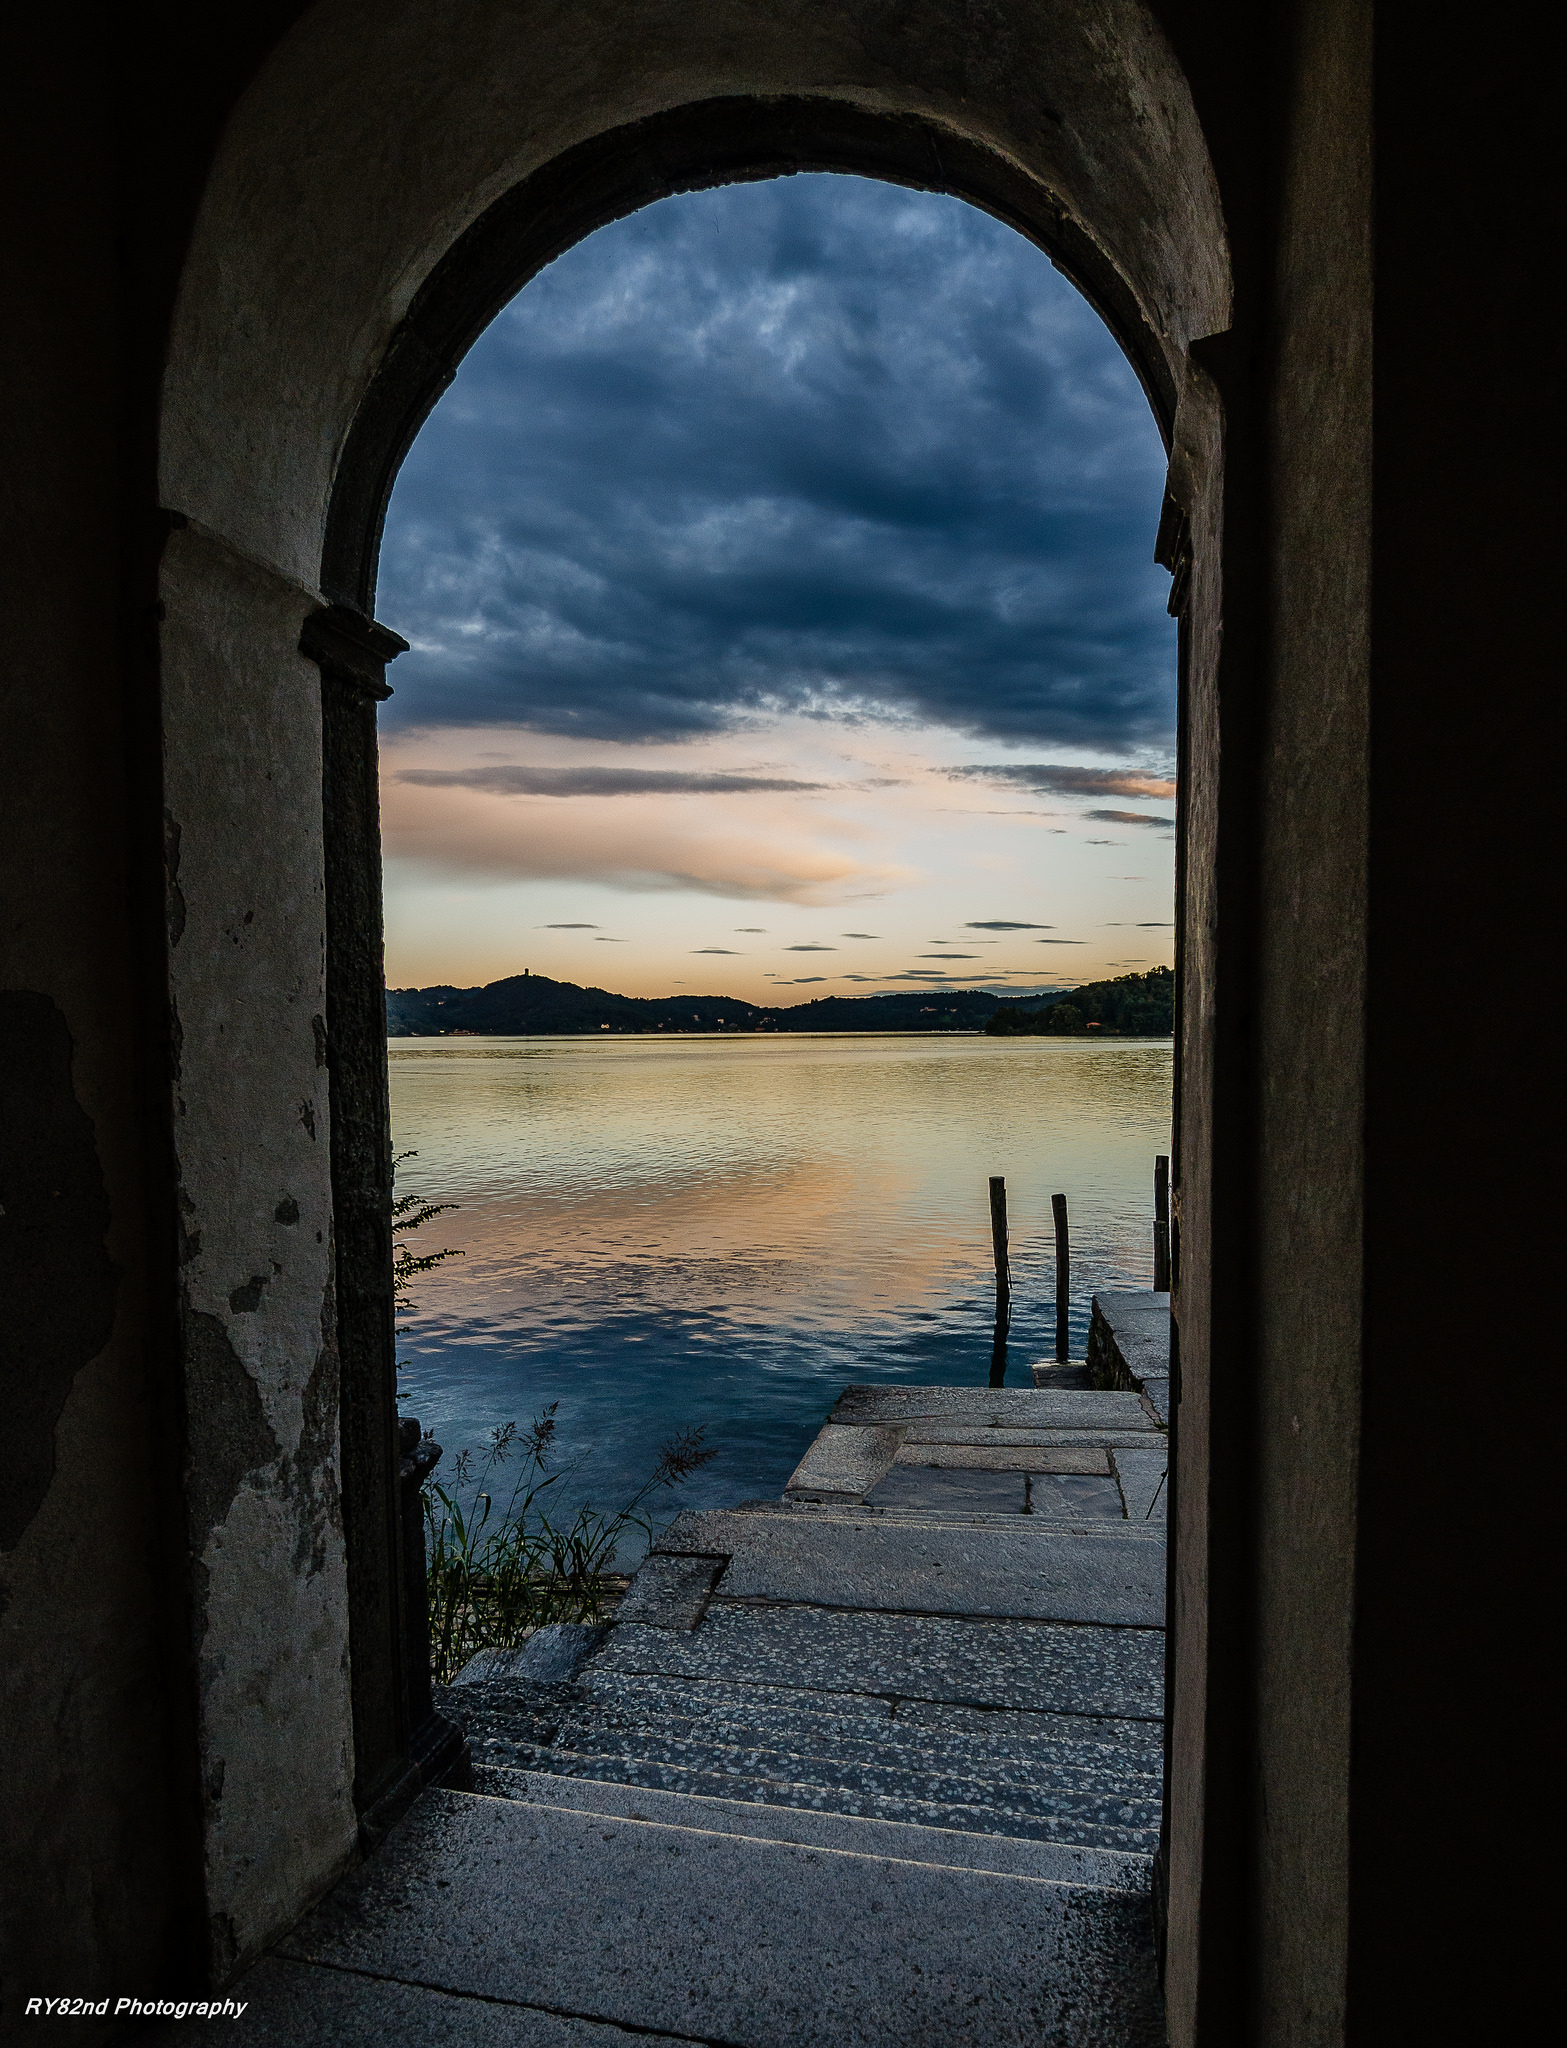 The door on the lake...